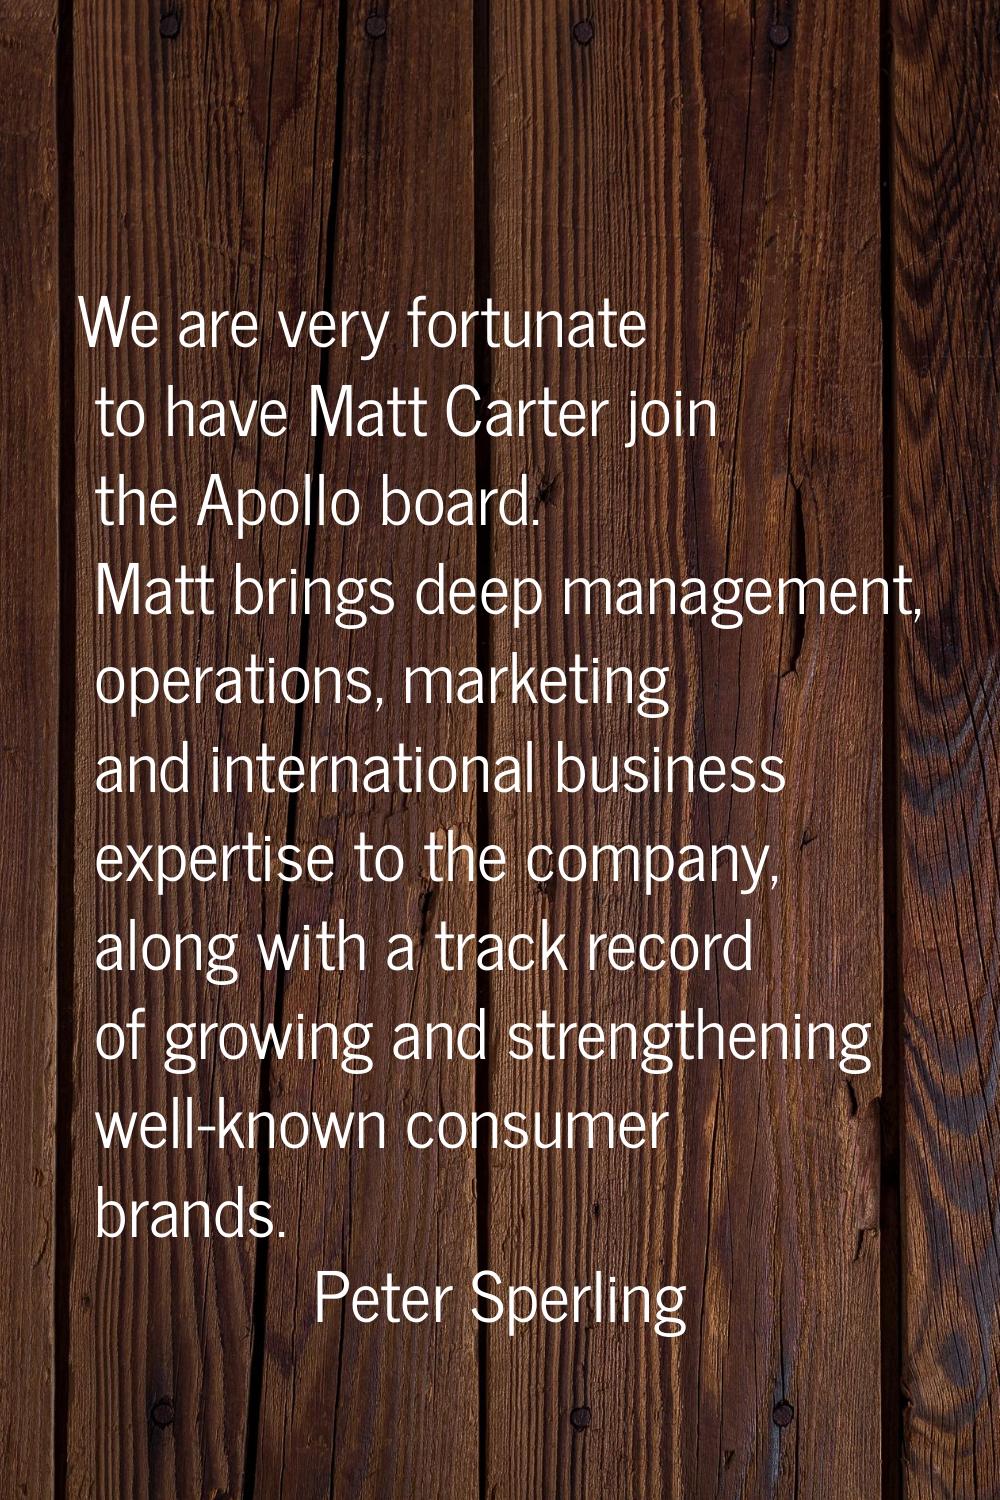 We are very fortunate to have Matt Carter join the Apollo board. Matt brings deep management, opera